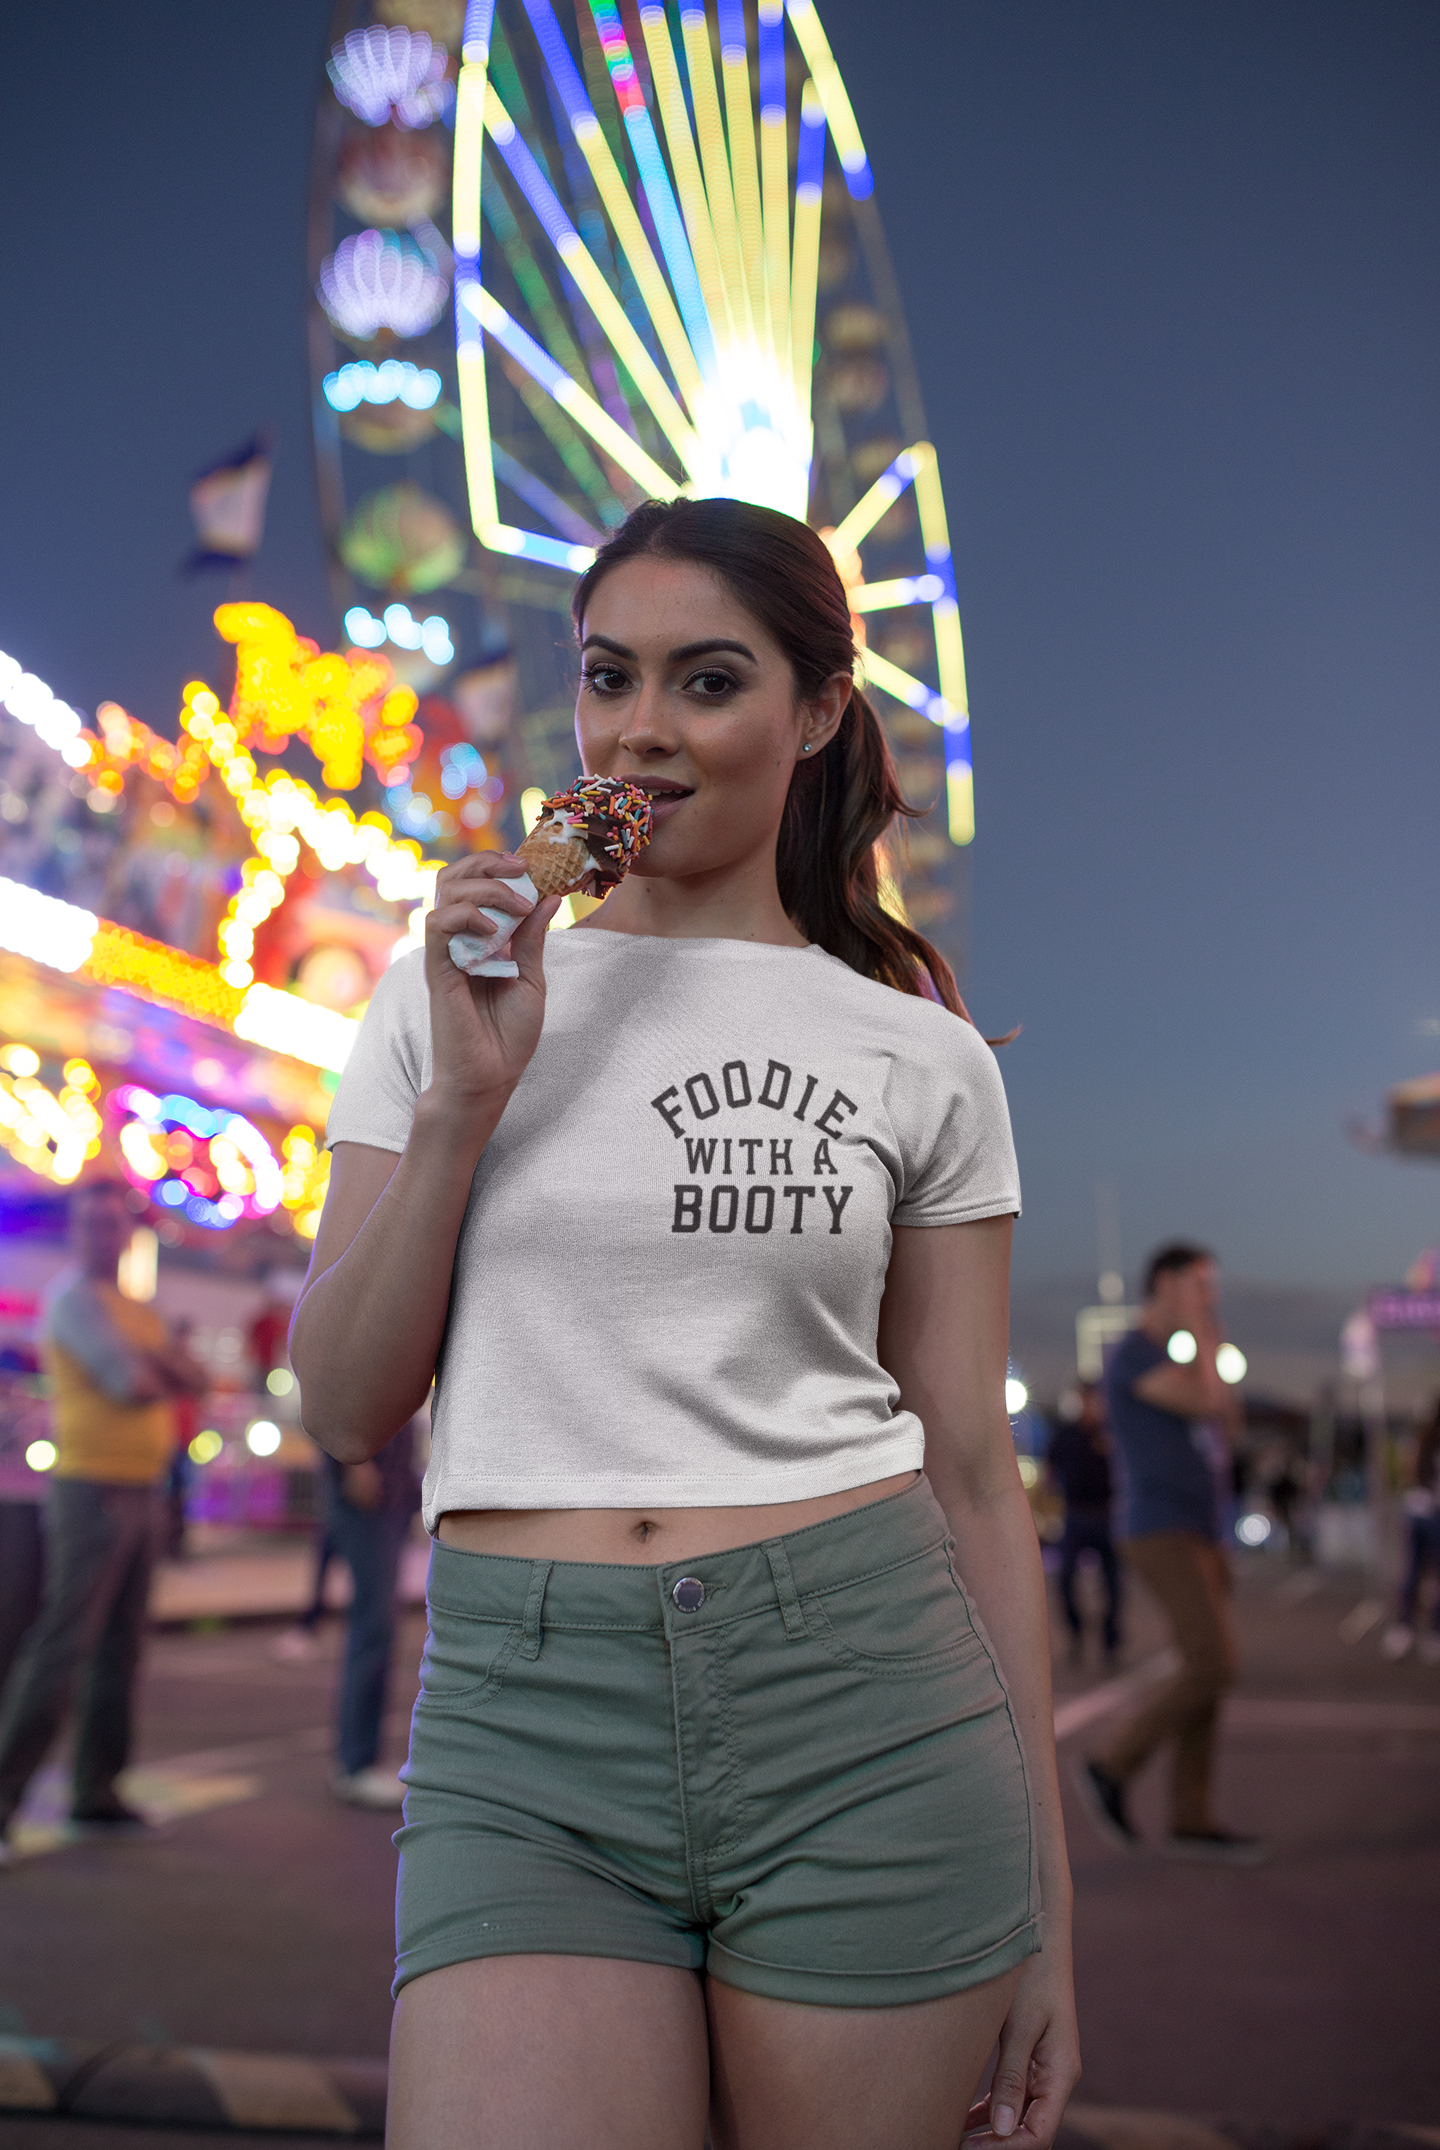 Foodie with a booty Crop Top